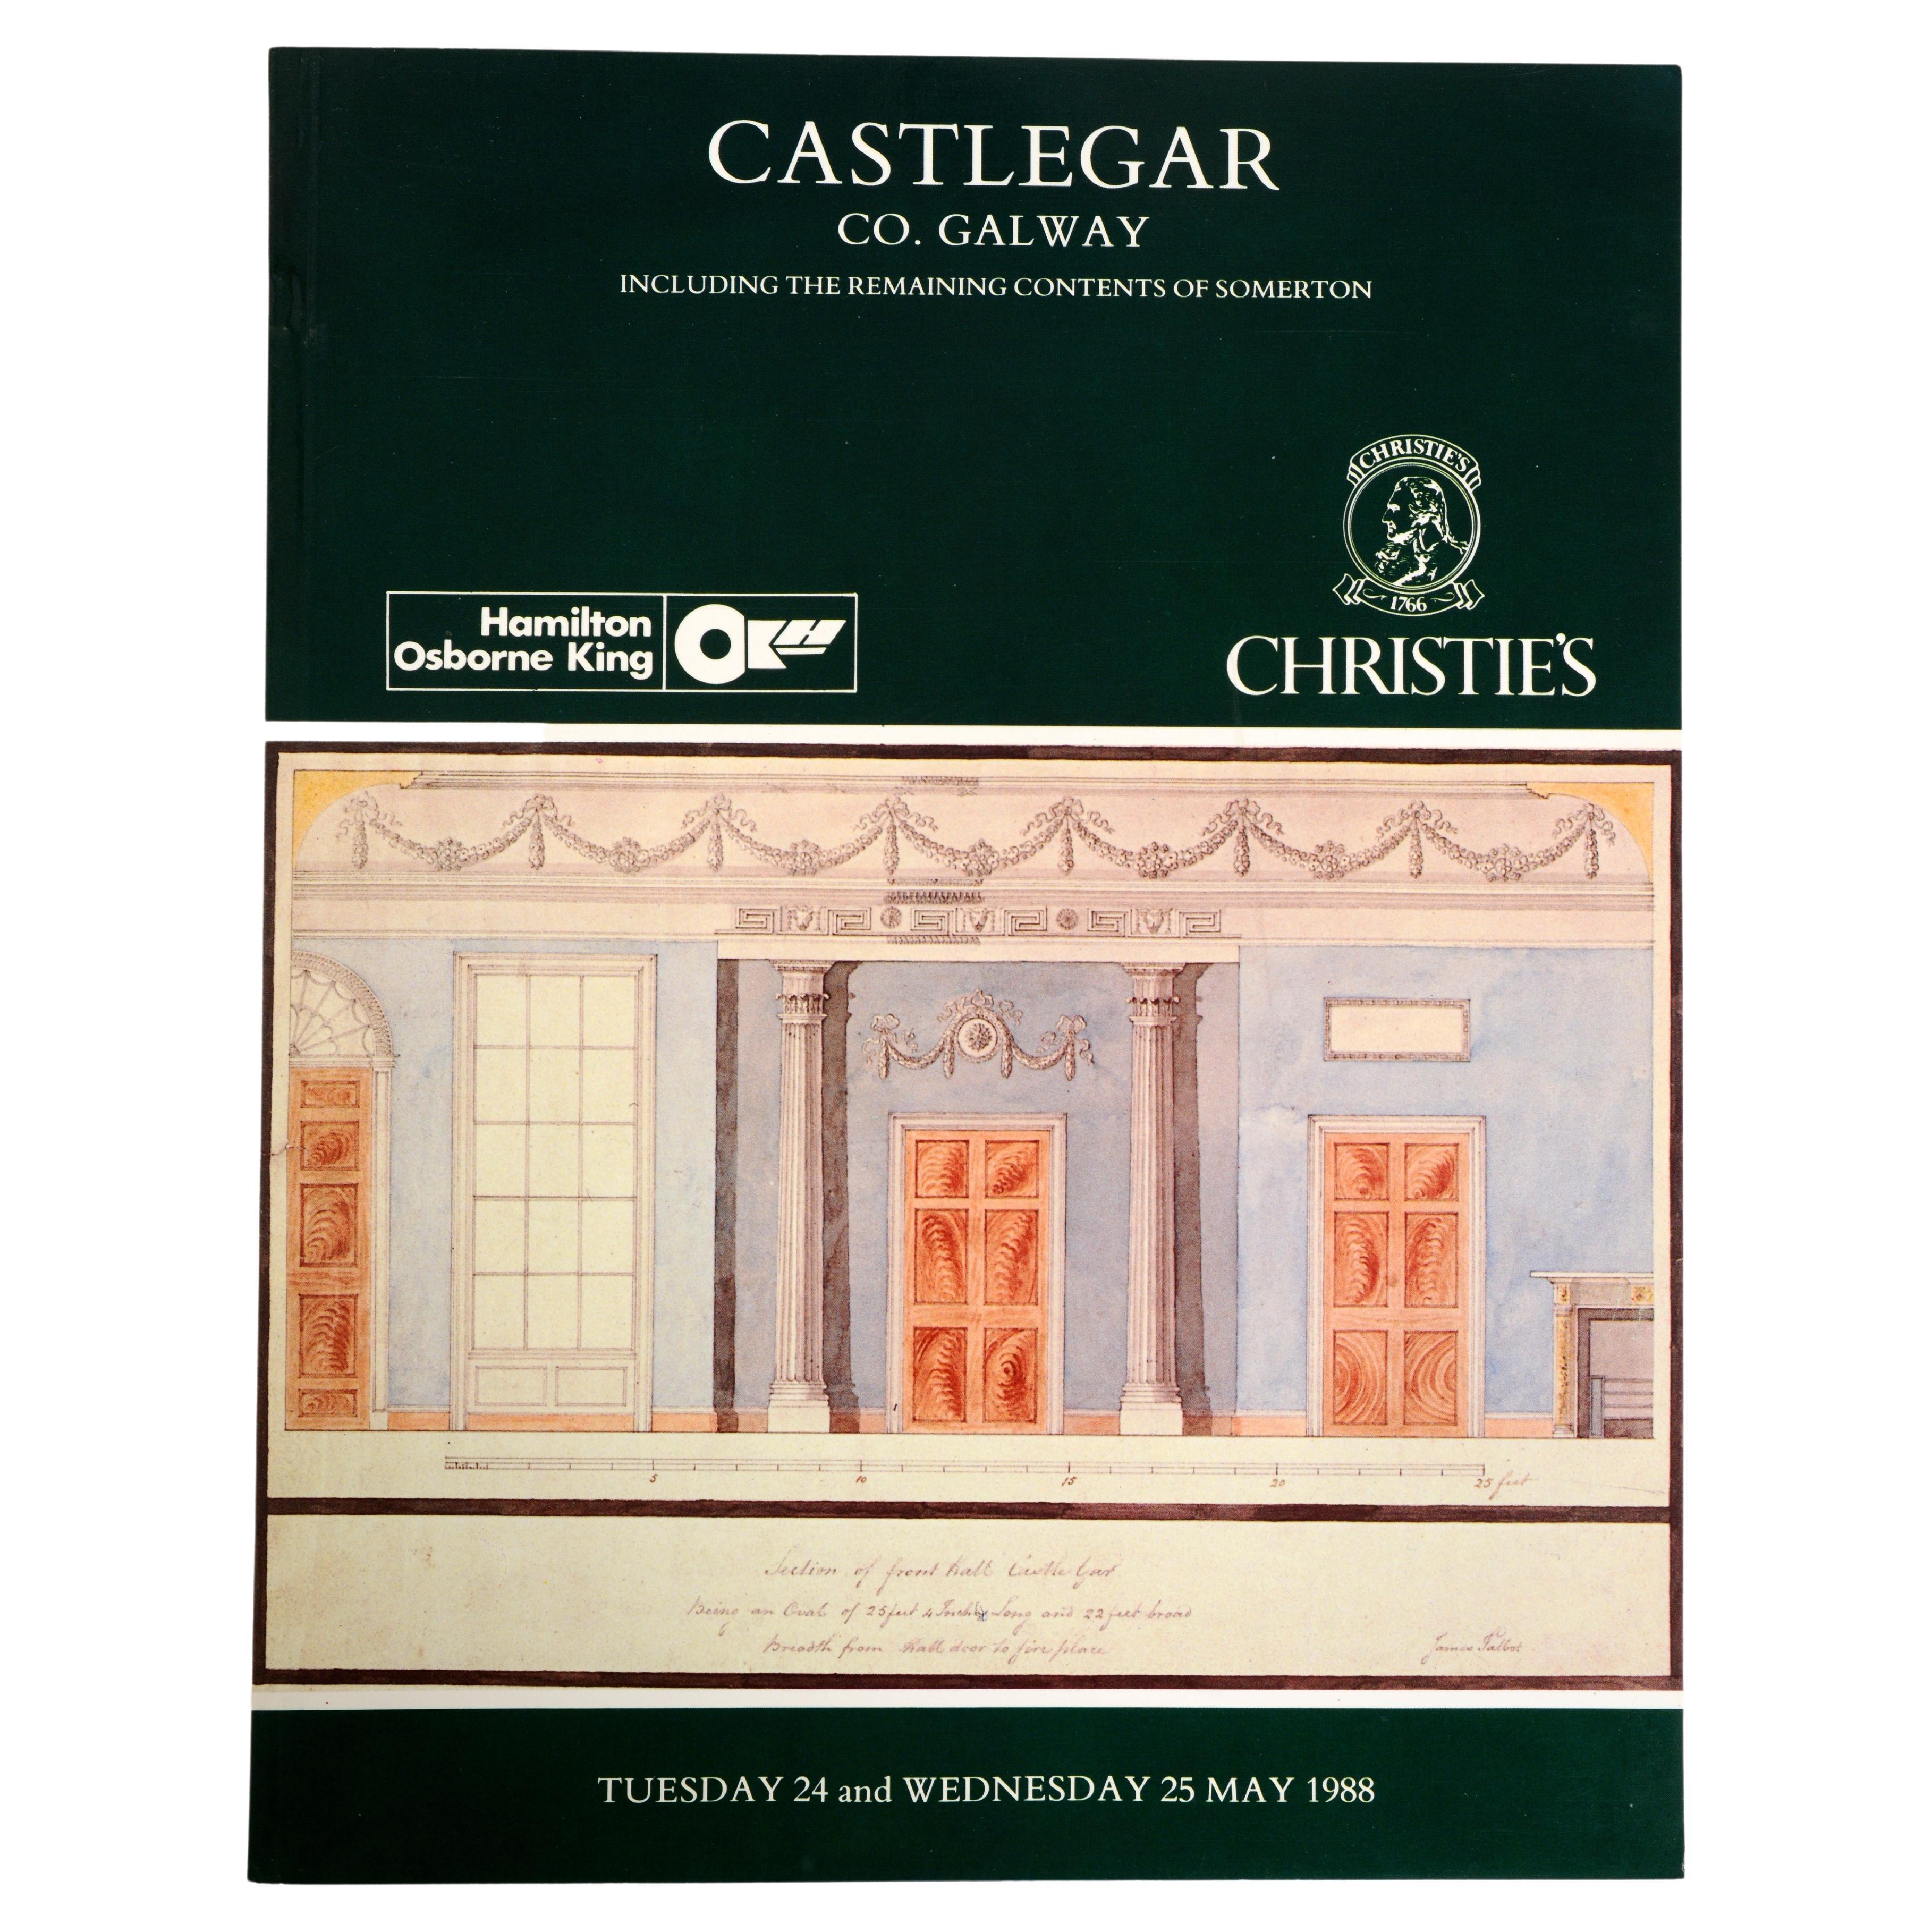 Christie's Sale Catalogue of the Contents of Castlegar, Ballinalsoe, Co. Galway